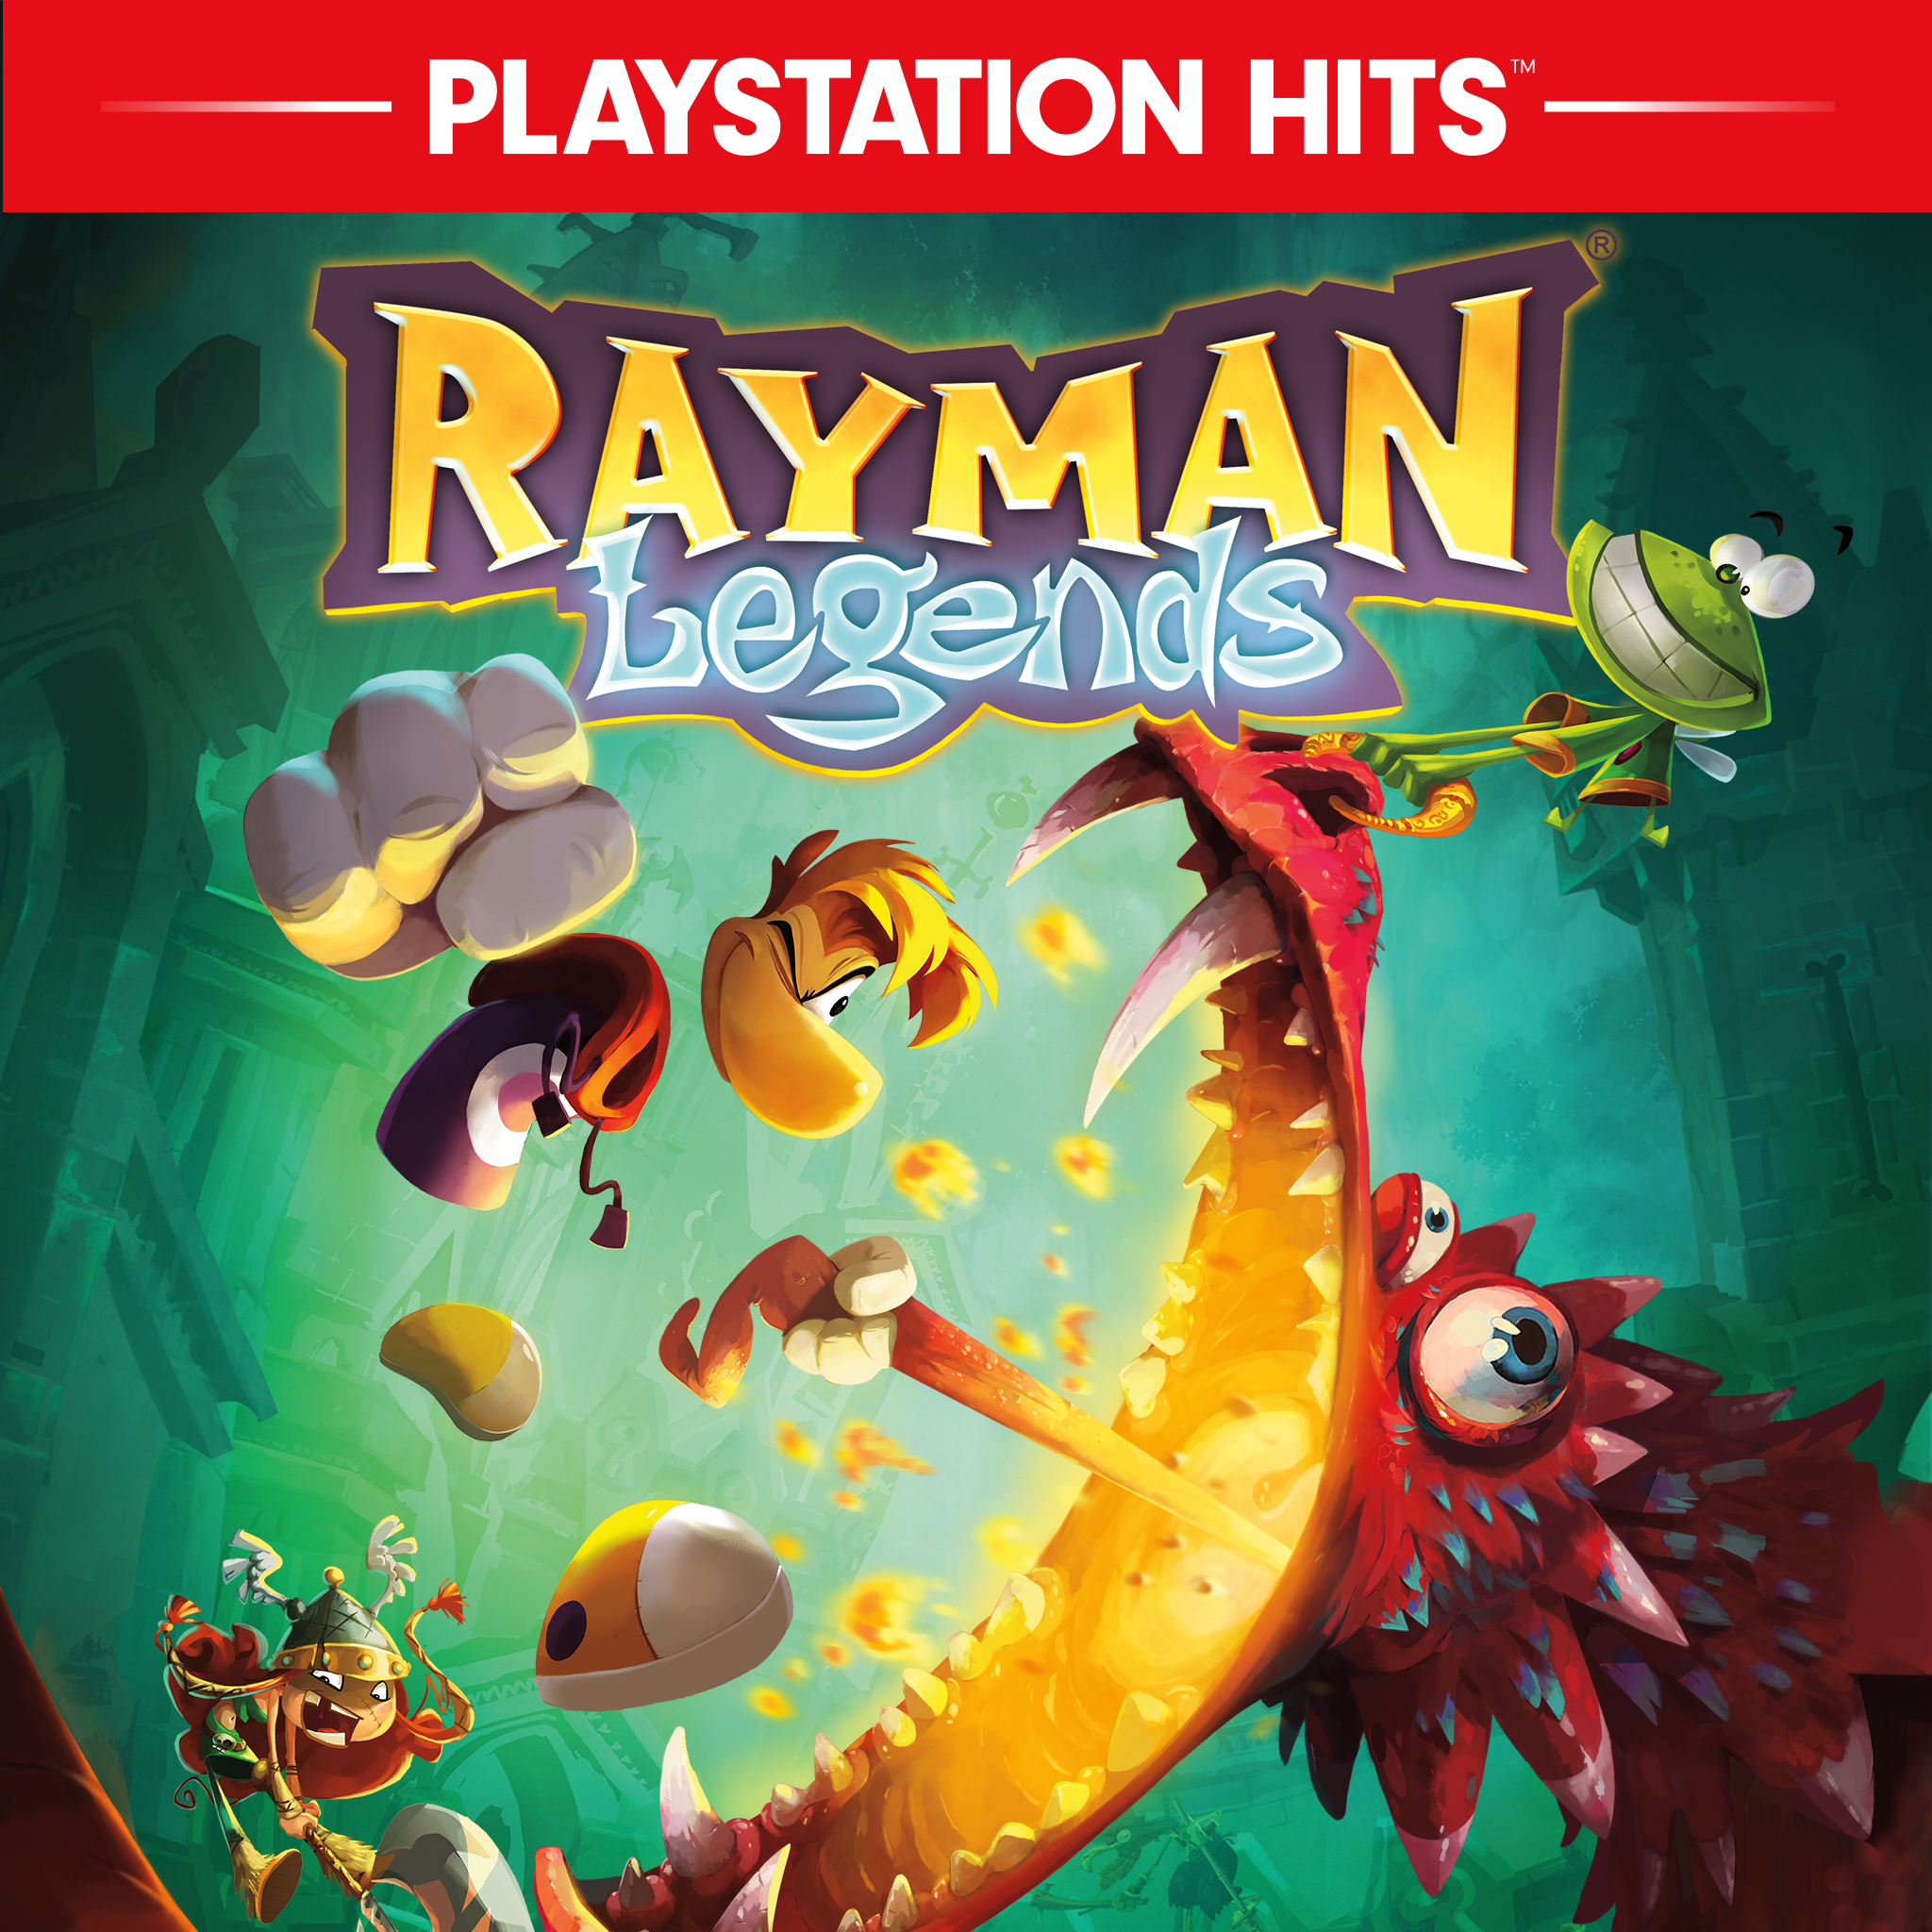 Bitterhed Odysseus hældning Rayman® Legends PS4 Price & Sale History | Get 75% Discount | PS Store USA